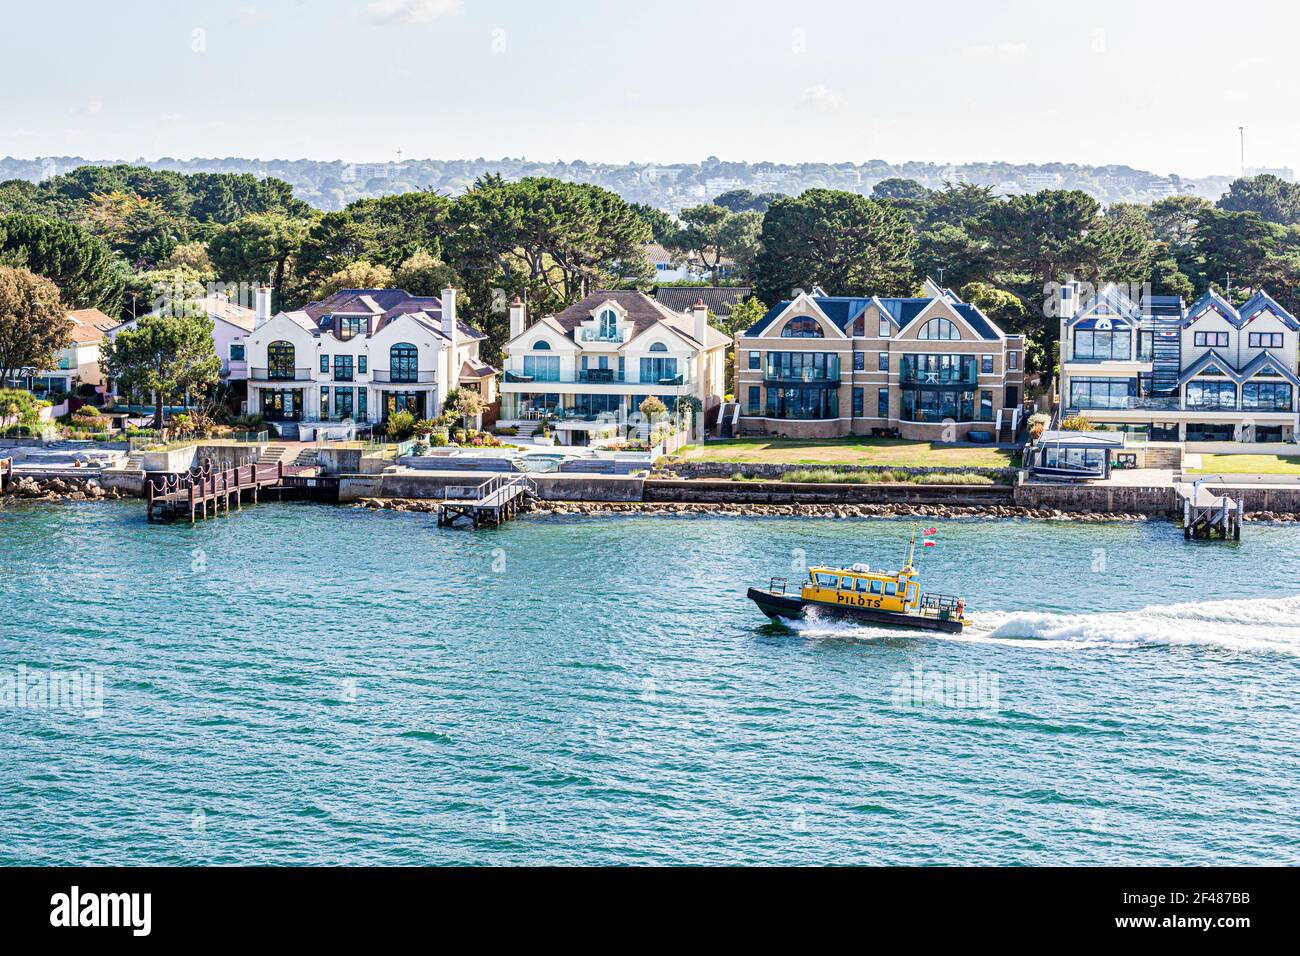 The harbourmaster's pilot boat passing luxury houses on the Sandbanks Peninsula in Poole Harbour, Dorset UK Stock Photo